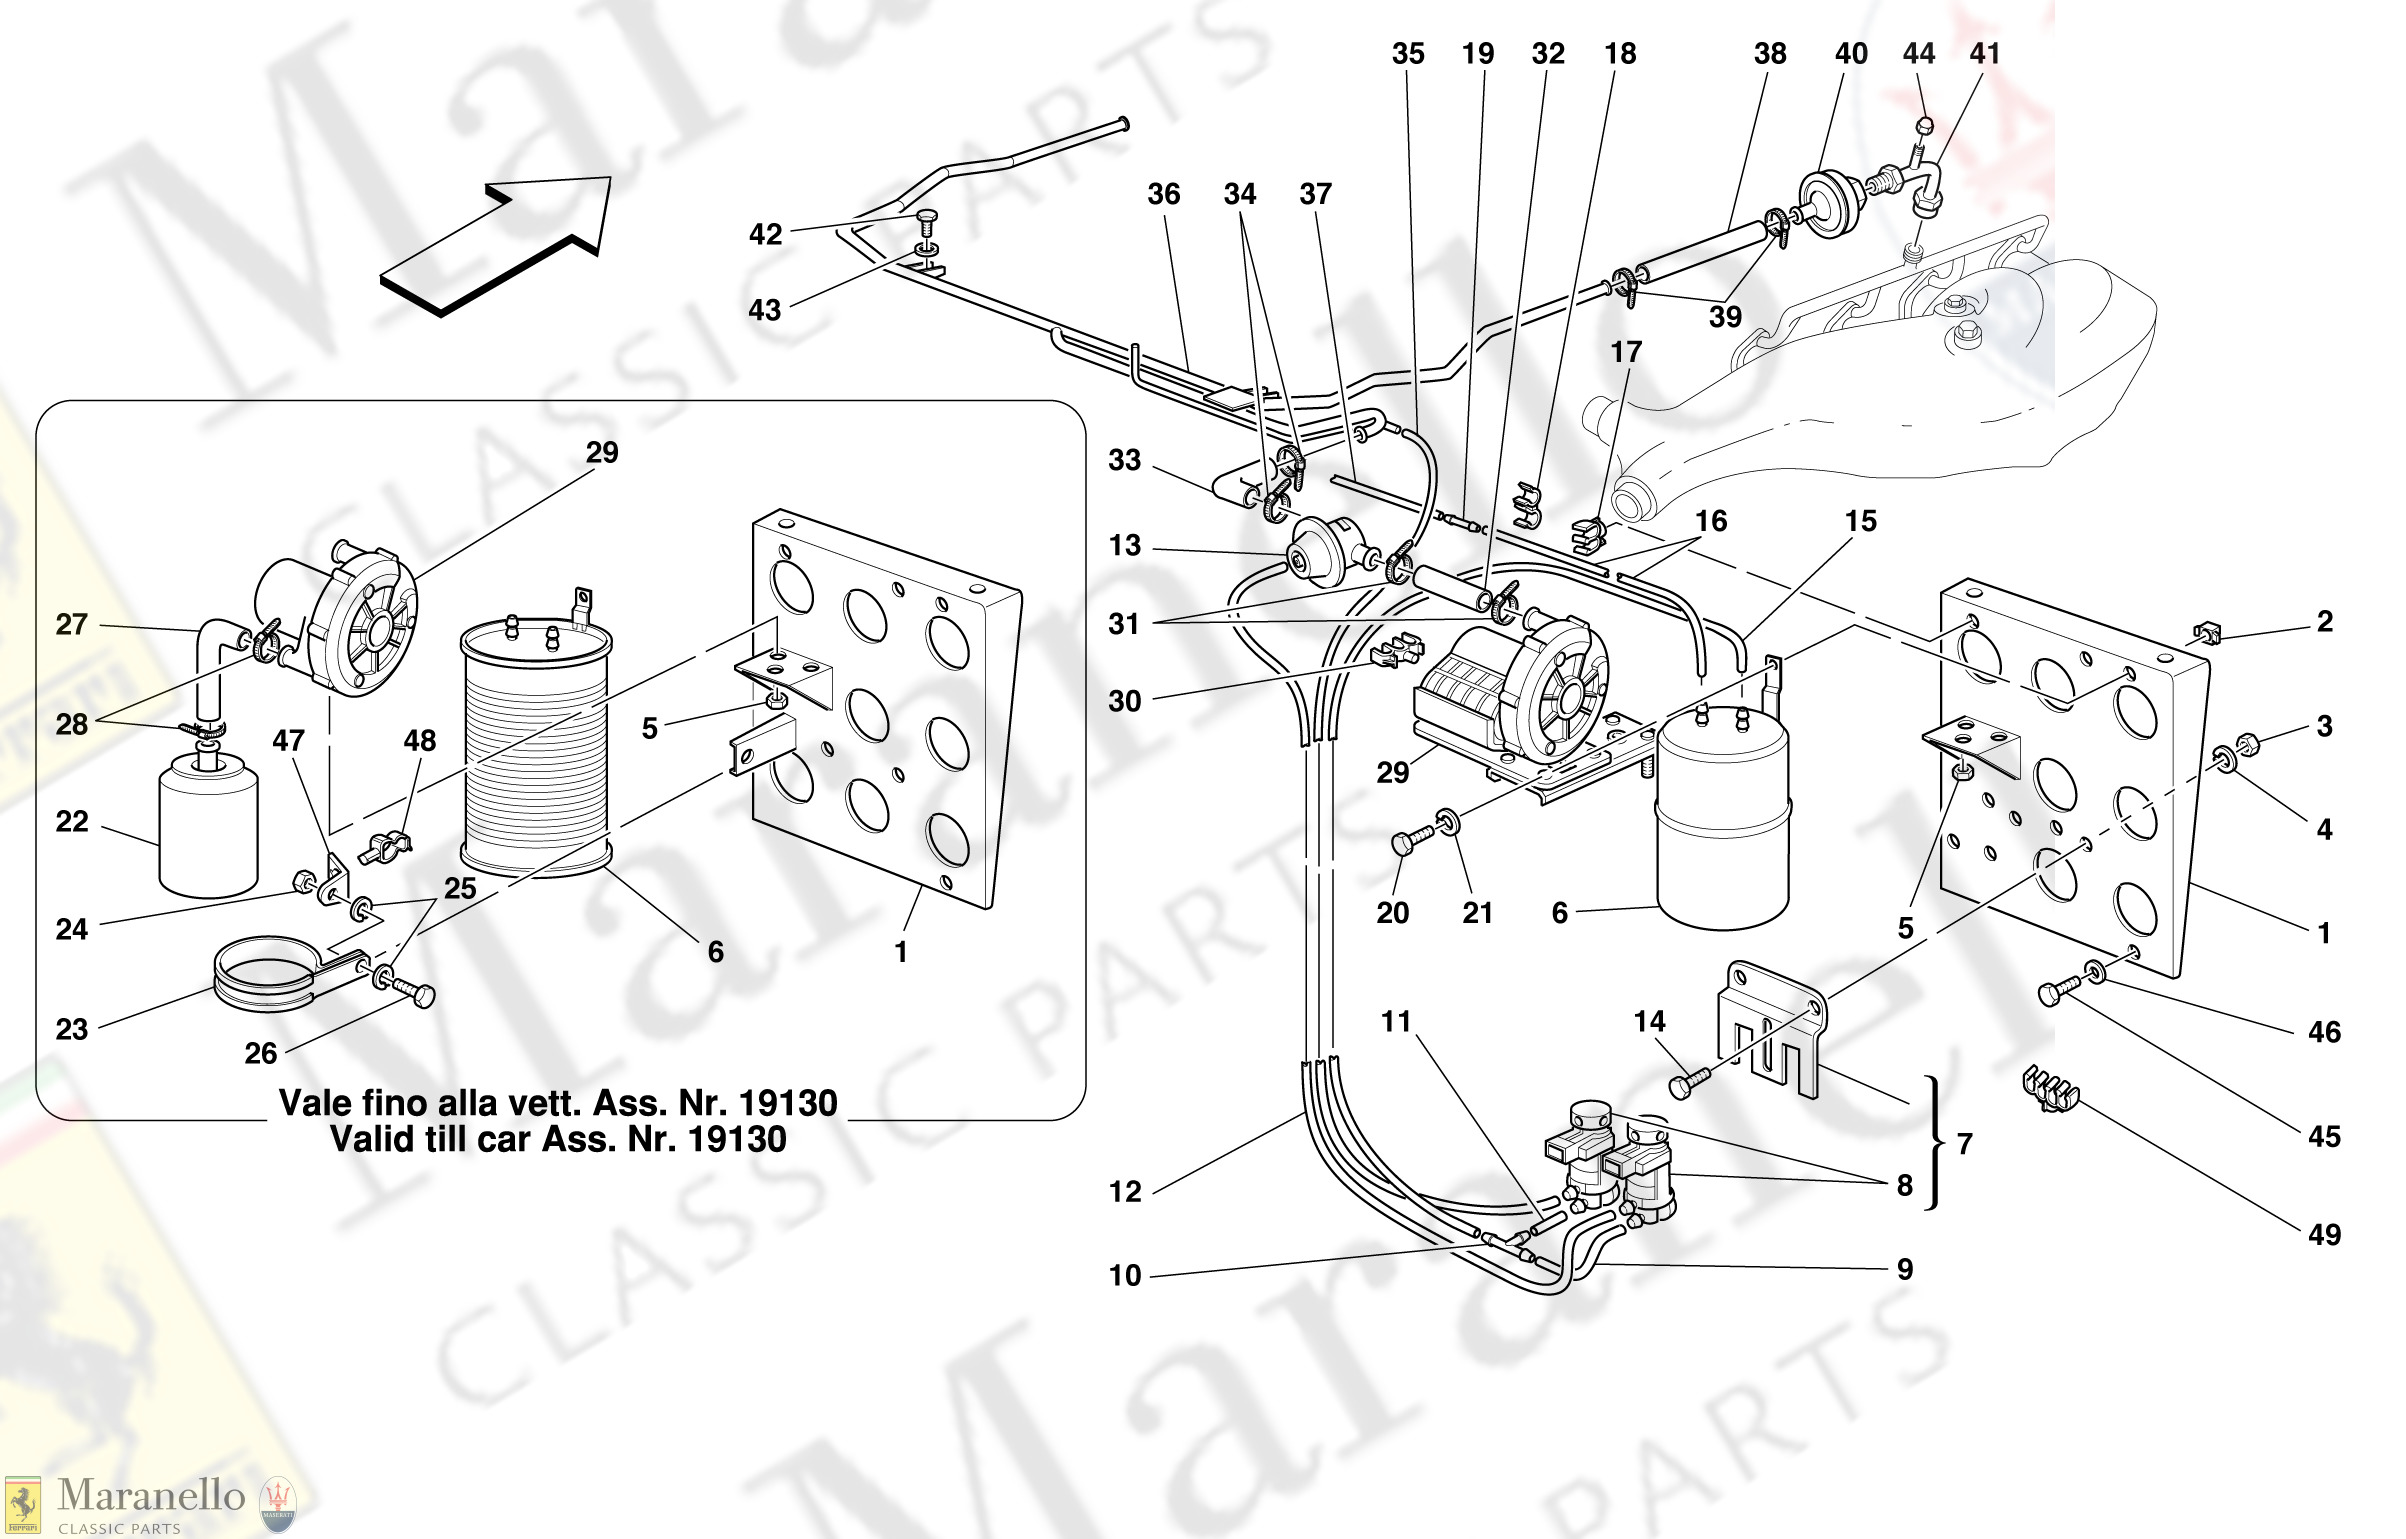 008 - Air Injection Device